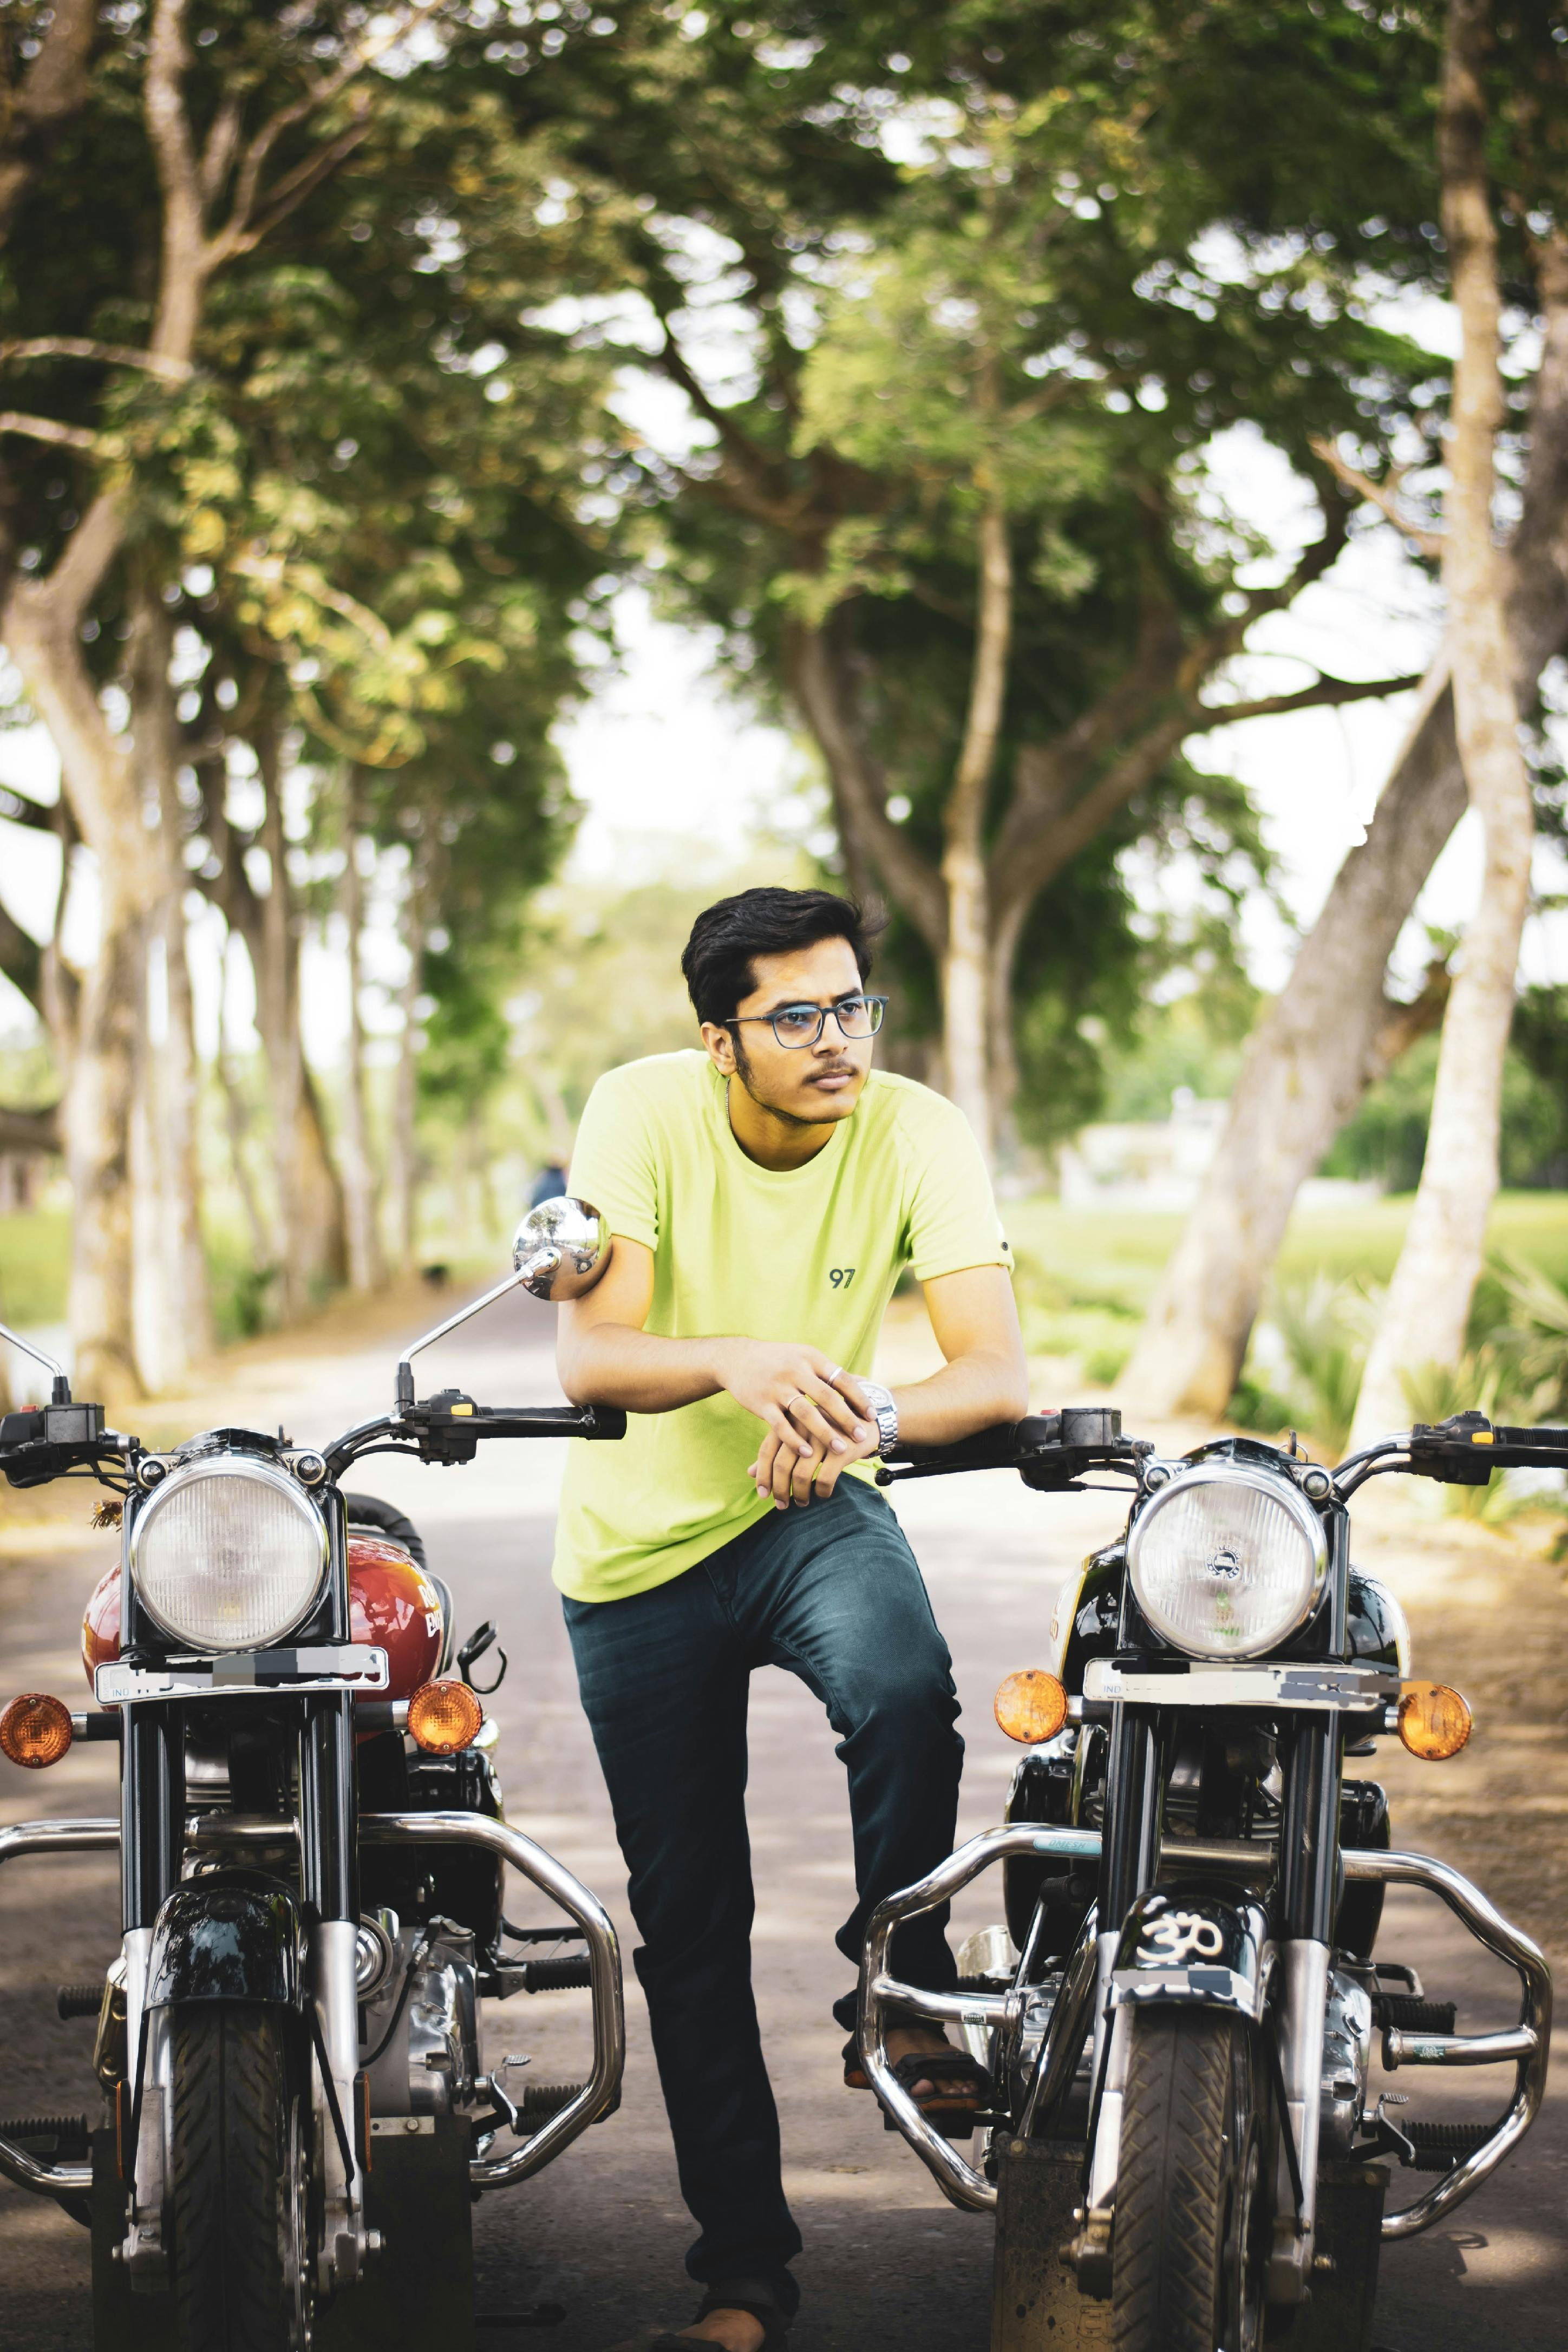 ROYAL ENFIELD PHOTOSHOOT POSE FOR BOYS PHOTO SHOOT WITH BULLET STAYLE  BIKE POSE BULLET POSE  YouTube